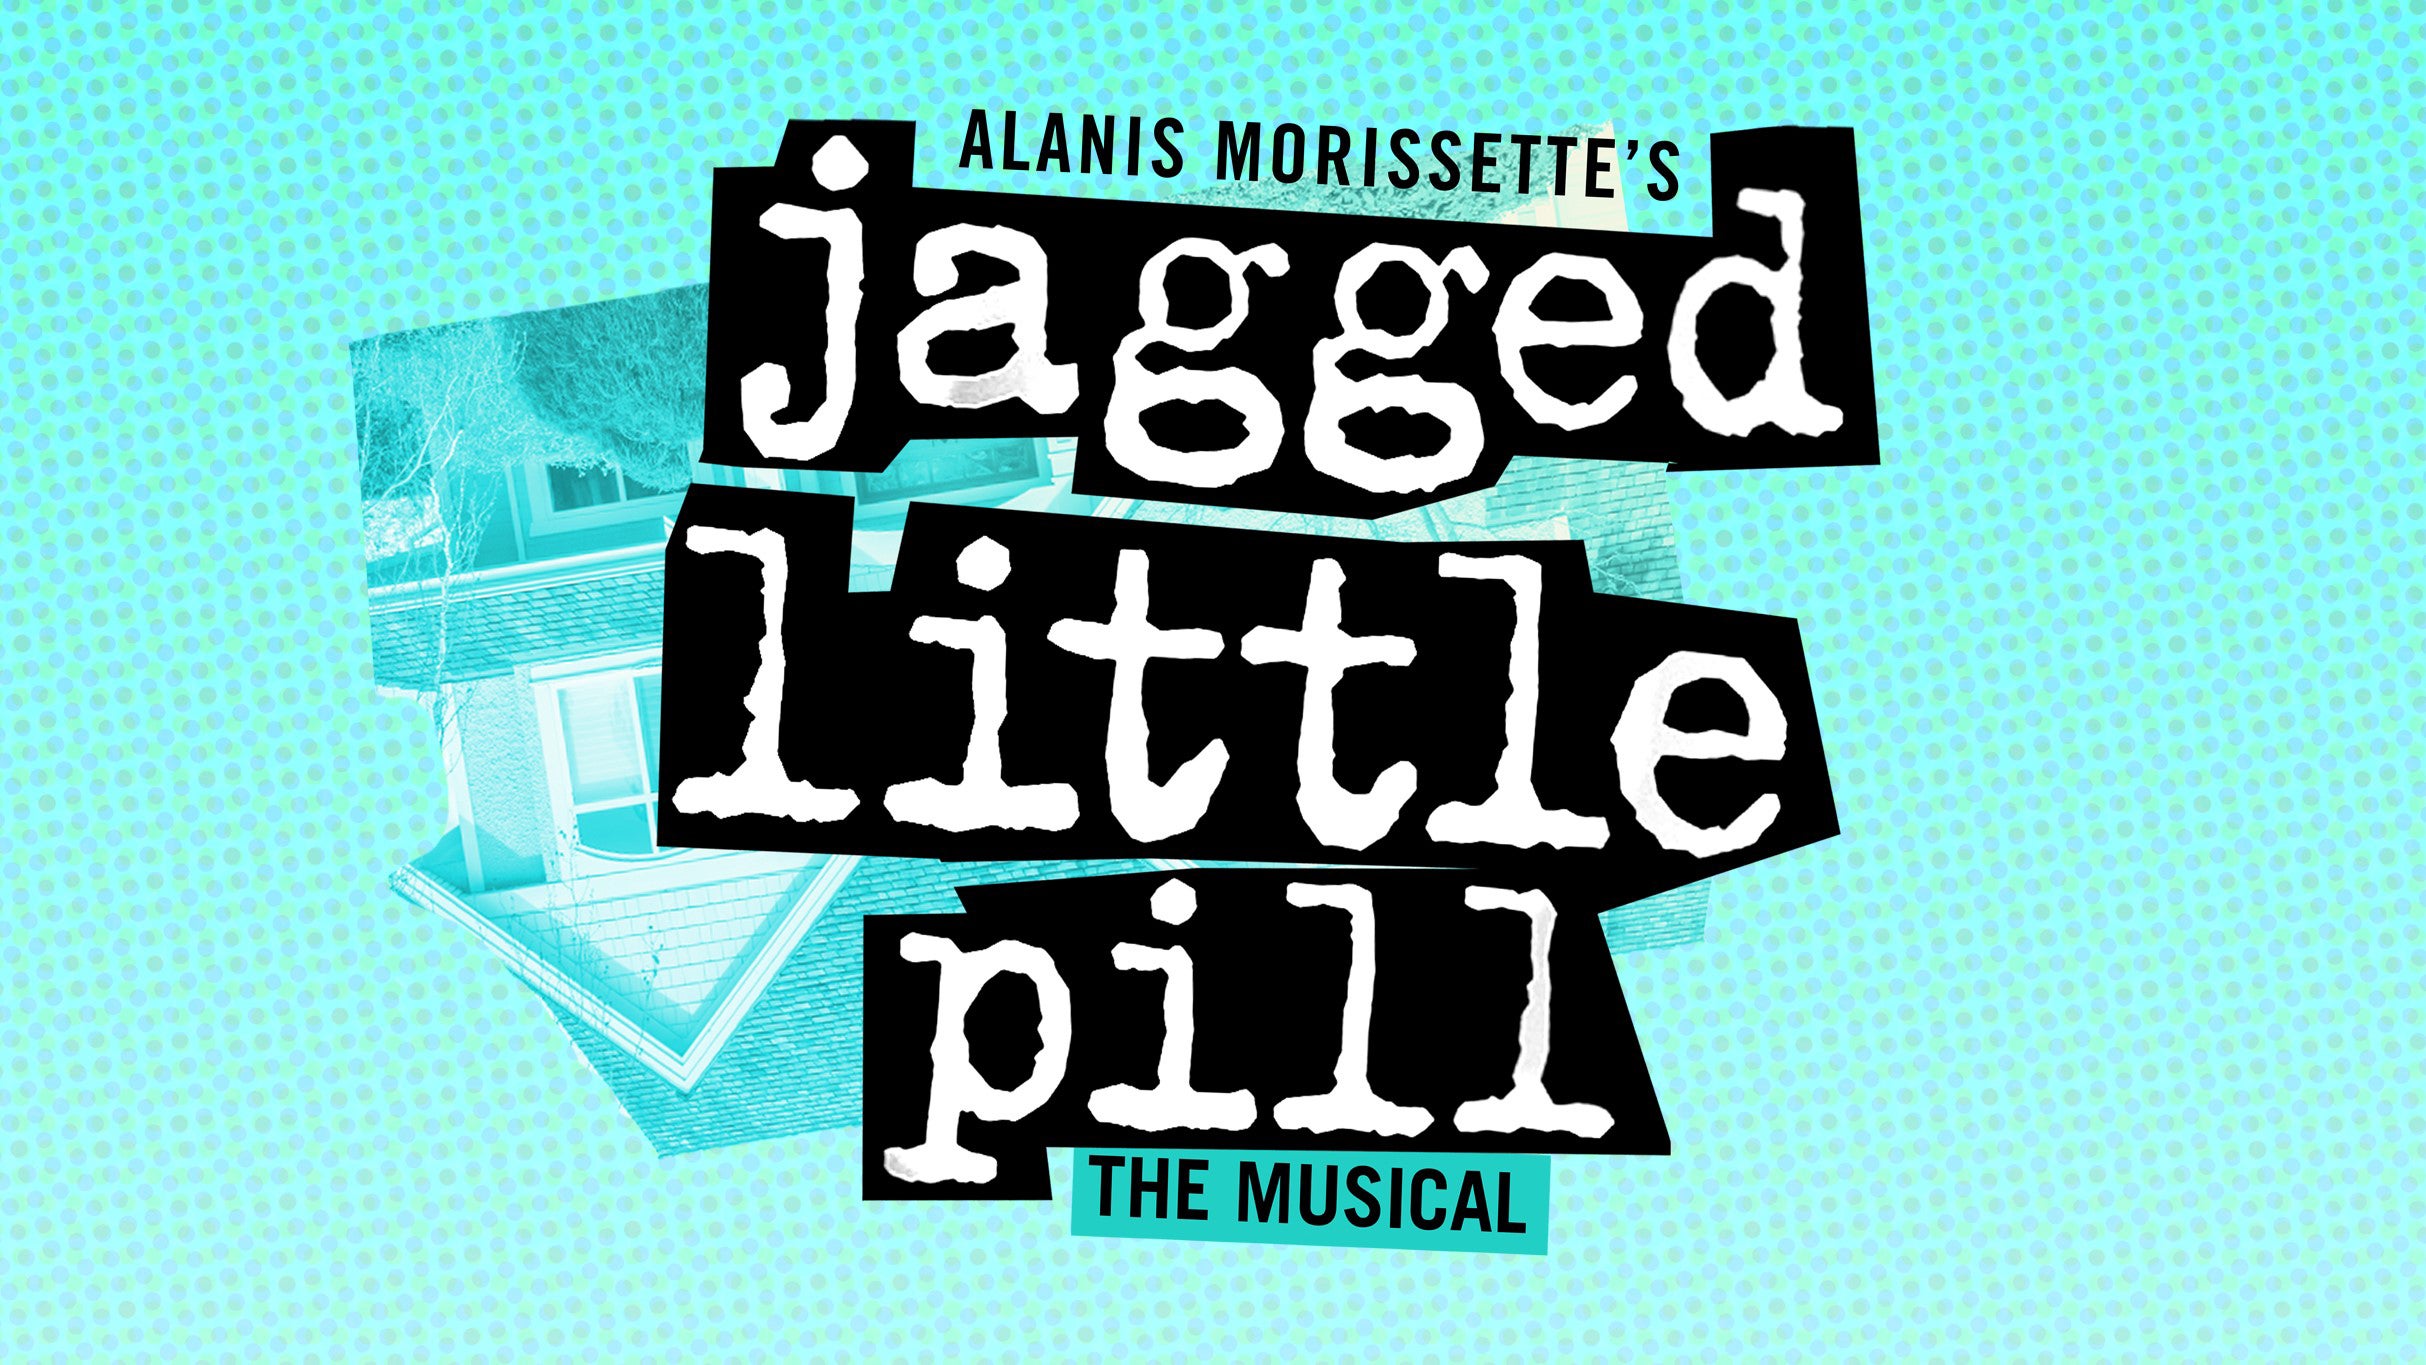 Jagged Little Pill at Hanover Theatre